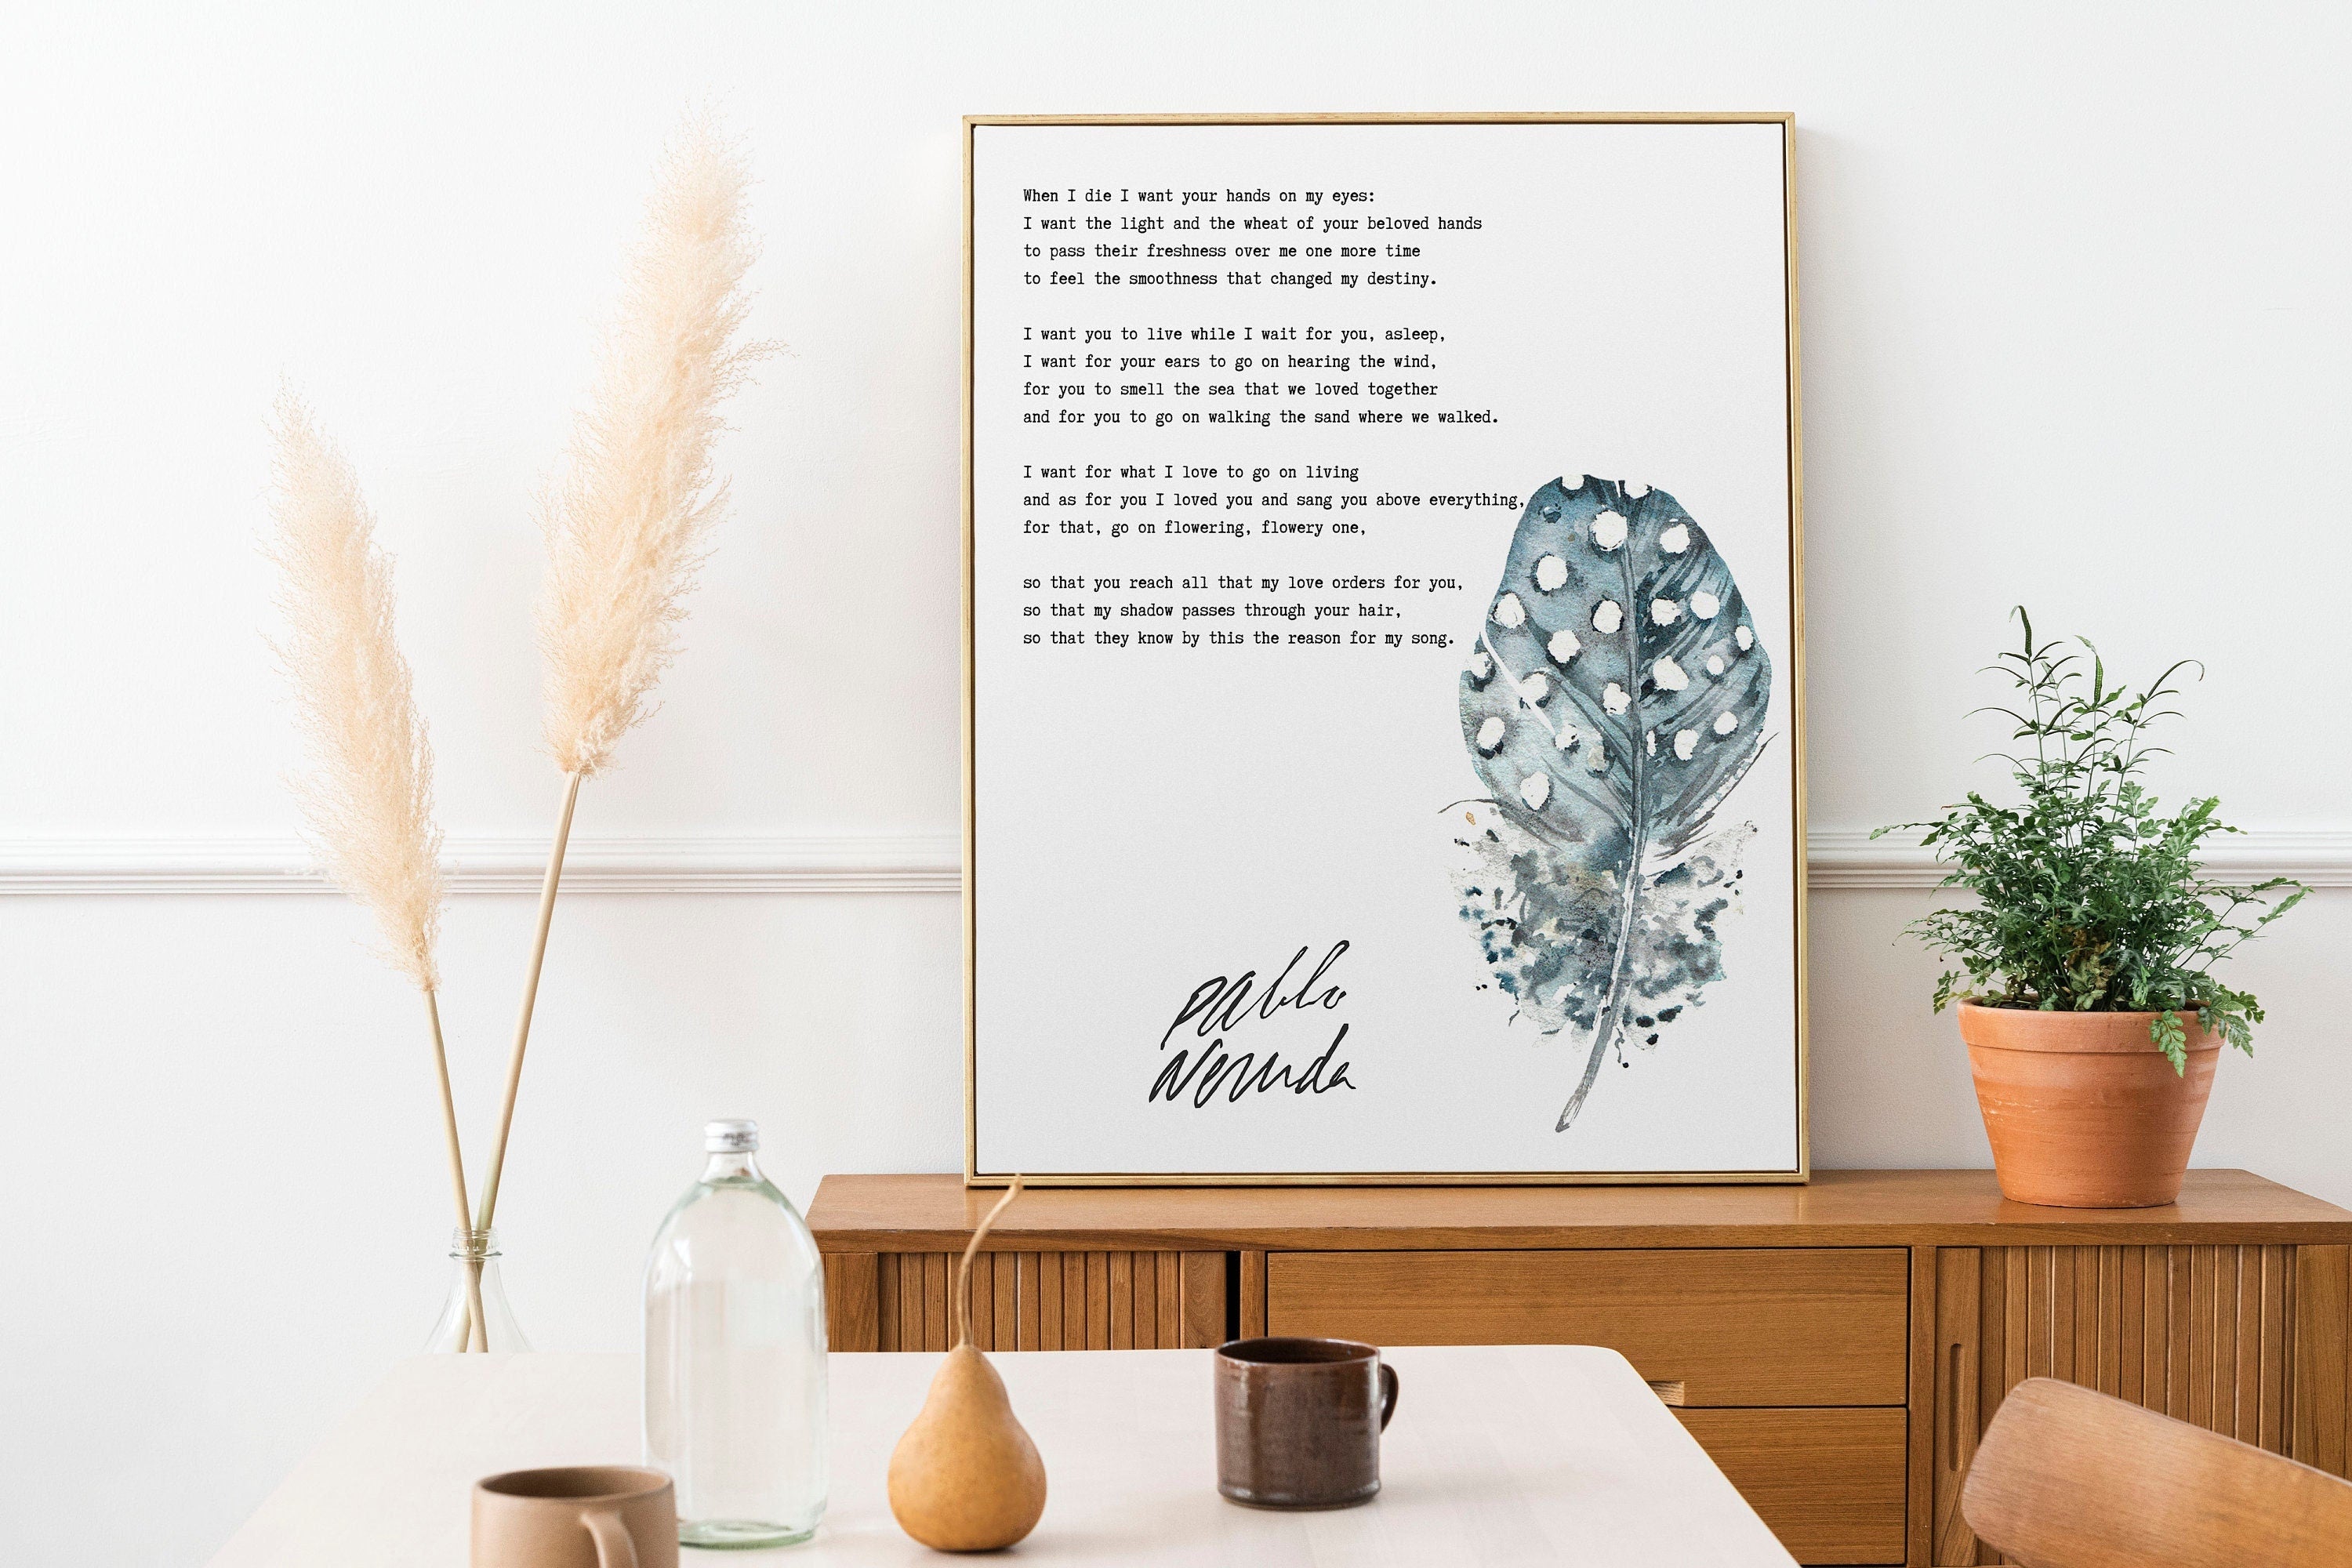 Pablo Neruda When I die I want your hands on my eyes, Unframed or Framed Poem Print in Black & White with Watercolour Feather Wall Art Decor